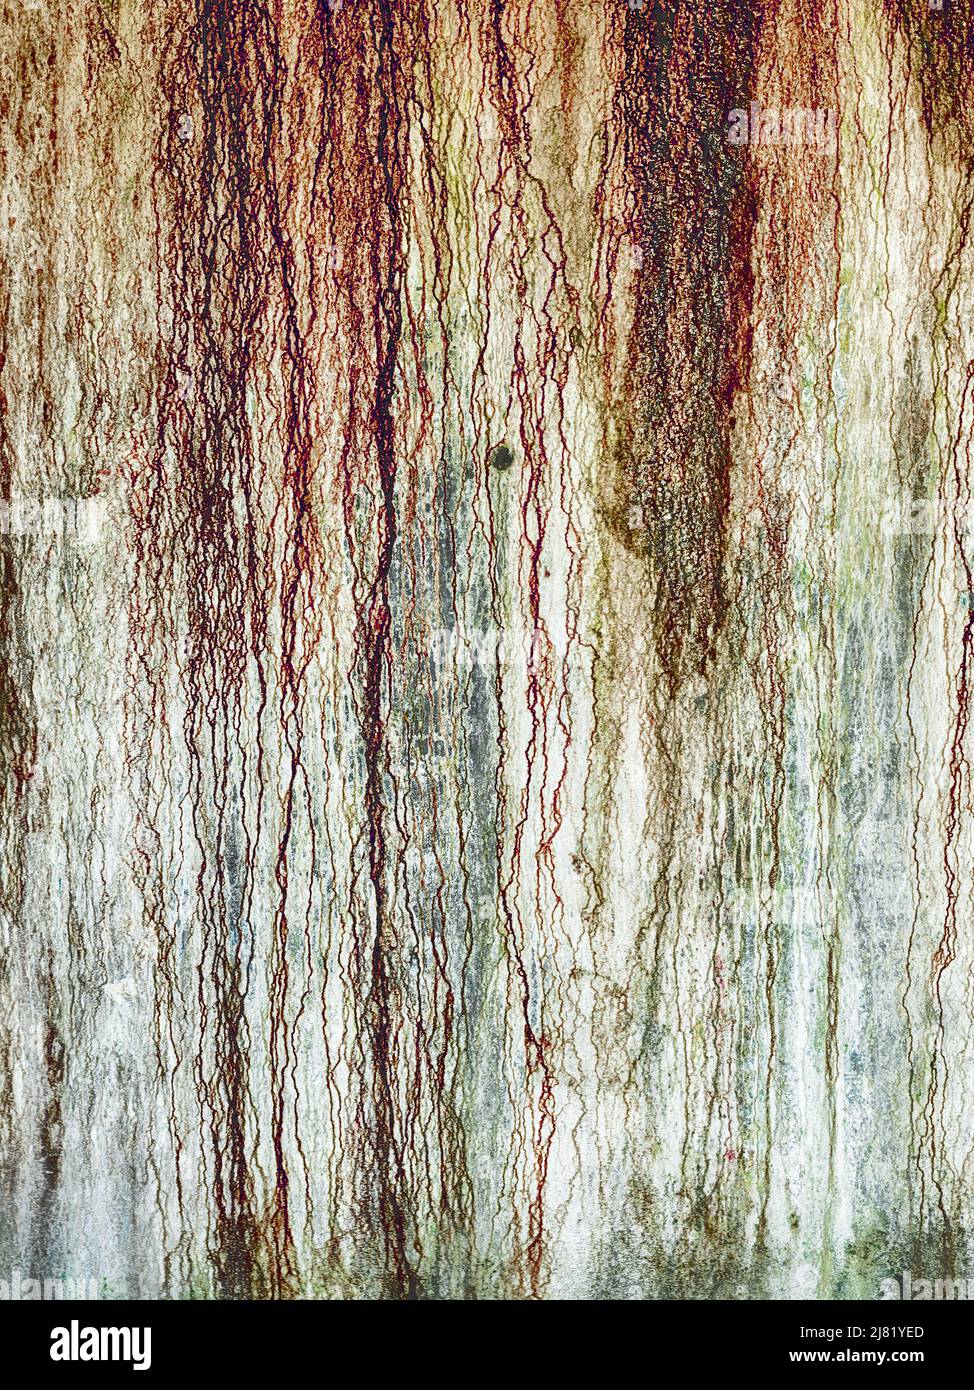 Rust stains from dripping water result in an abstract background pattern that looks like bloodstains. Stock Photo